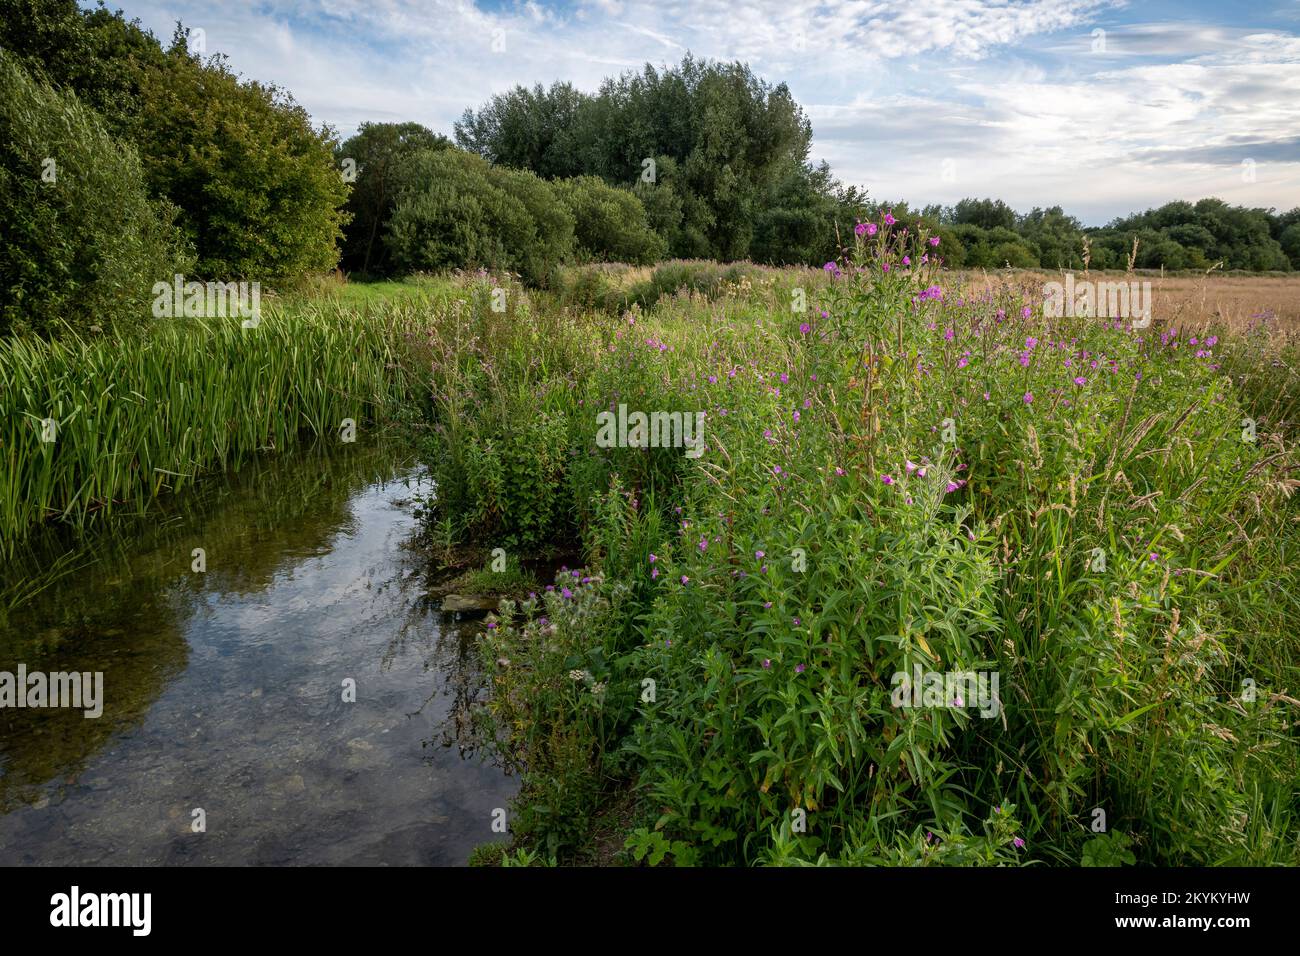 Rose Bay Willow Herb on the banks of Costa Beck in Pickering, North Yorkshire Stock Photo